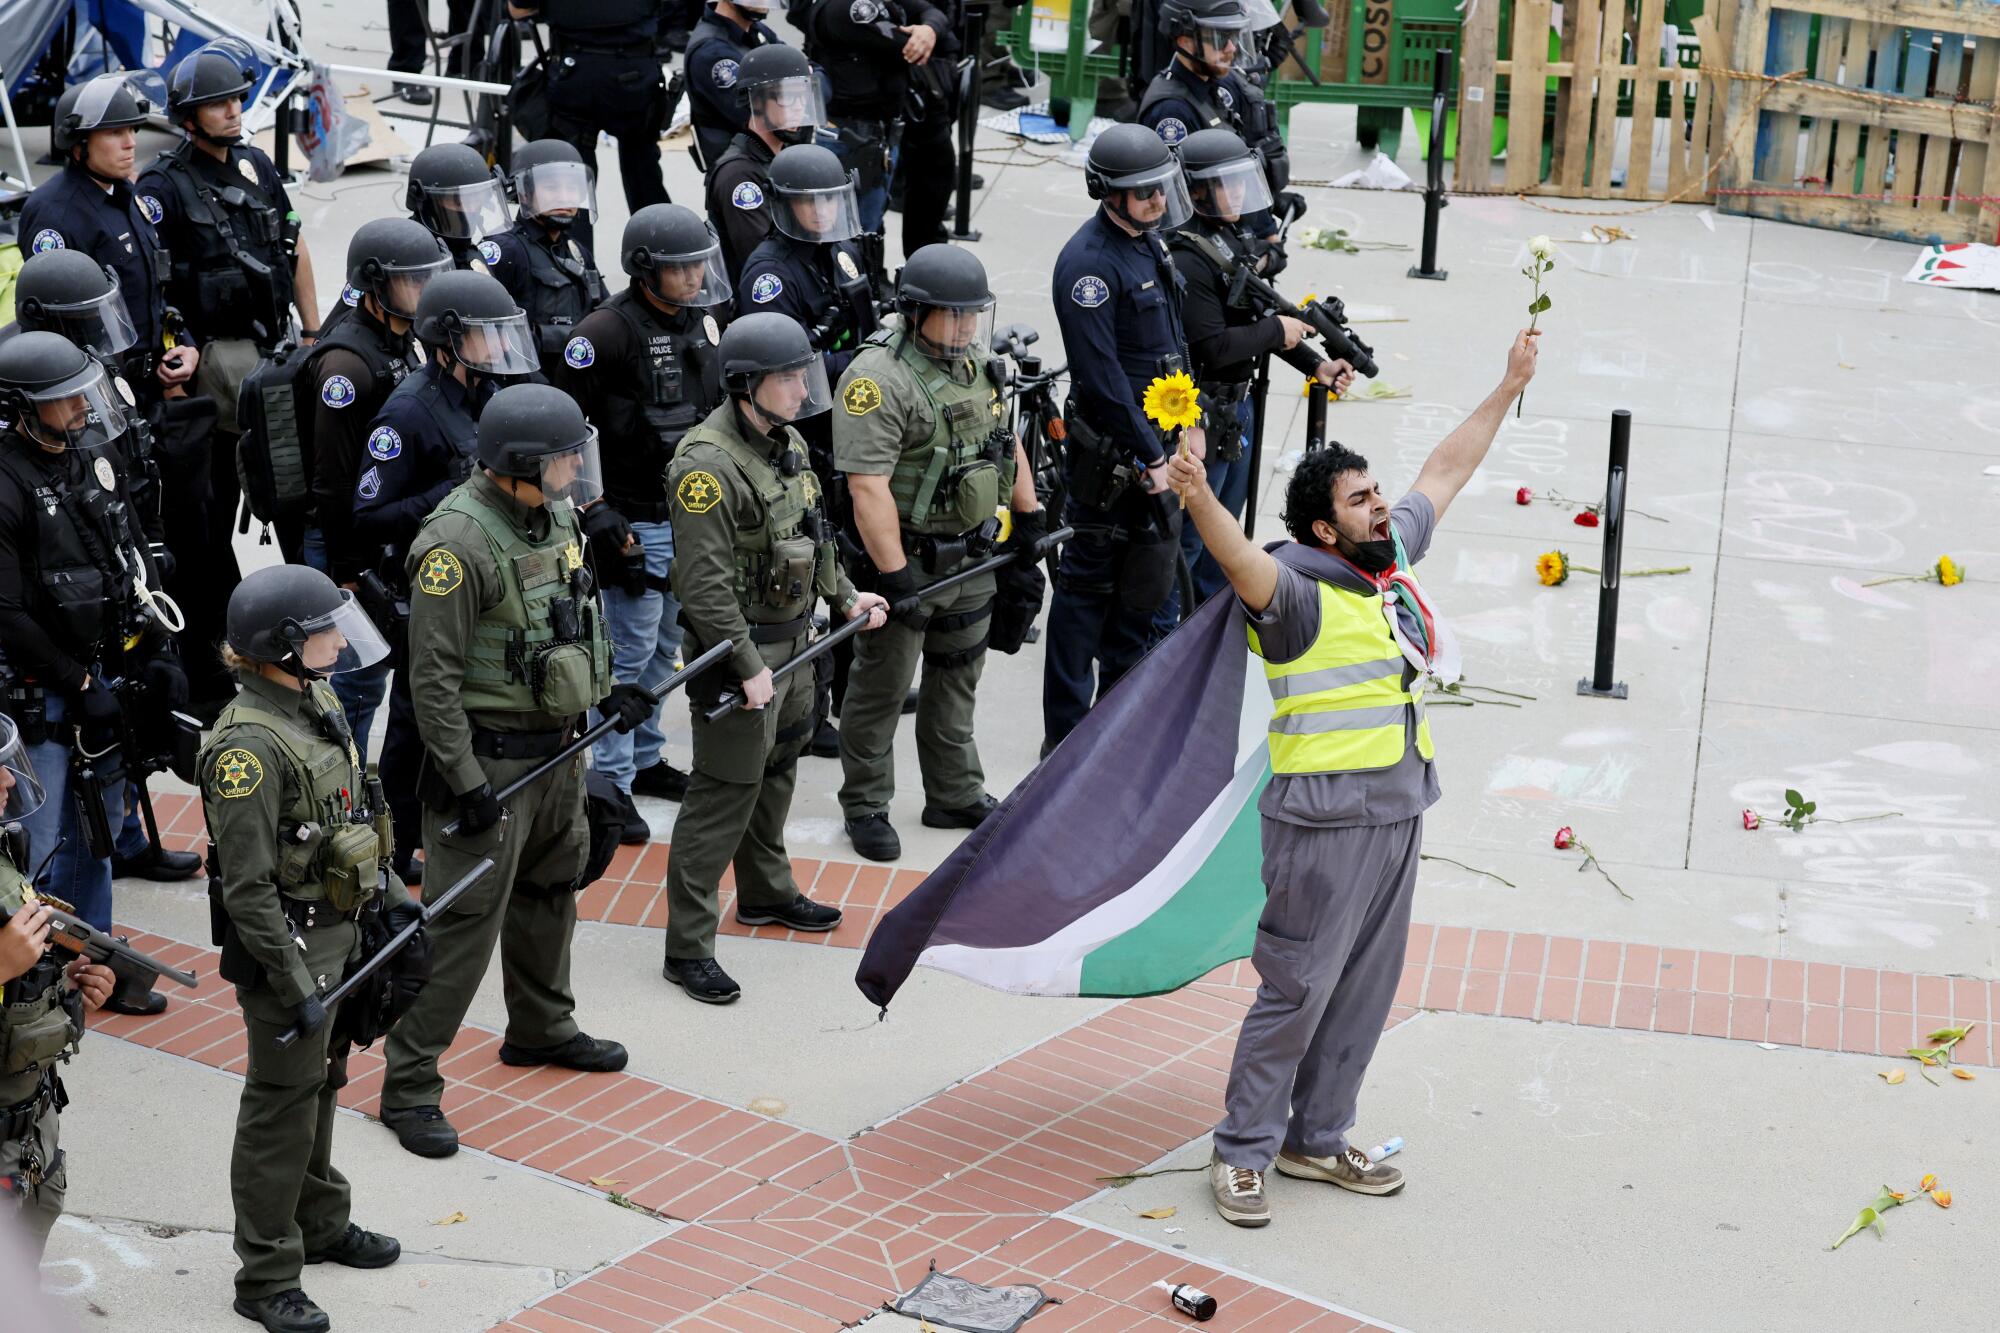 A pro-Palestinian protester stands in front of a line of law enforcement officers from multiple agencies.